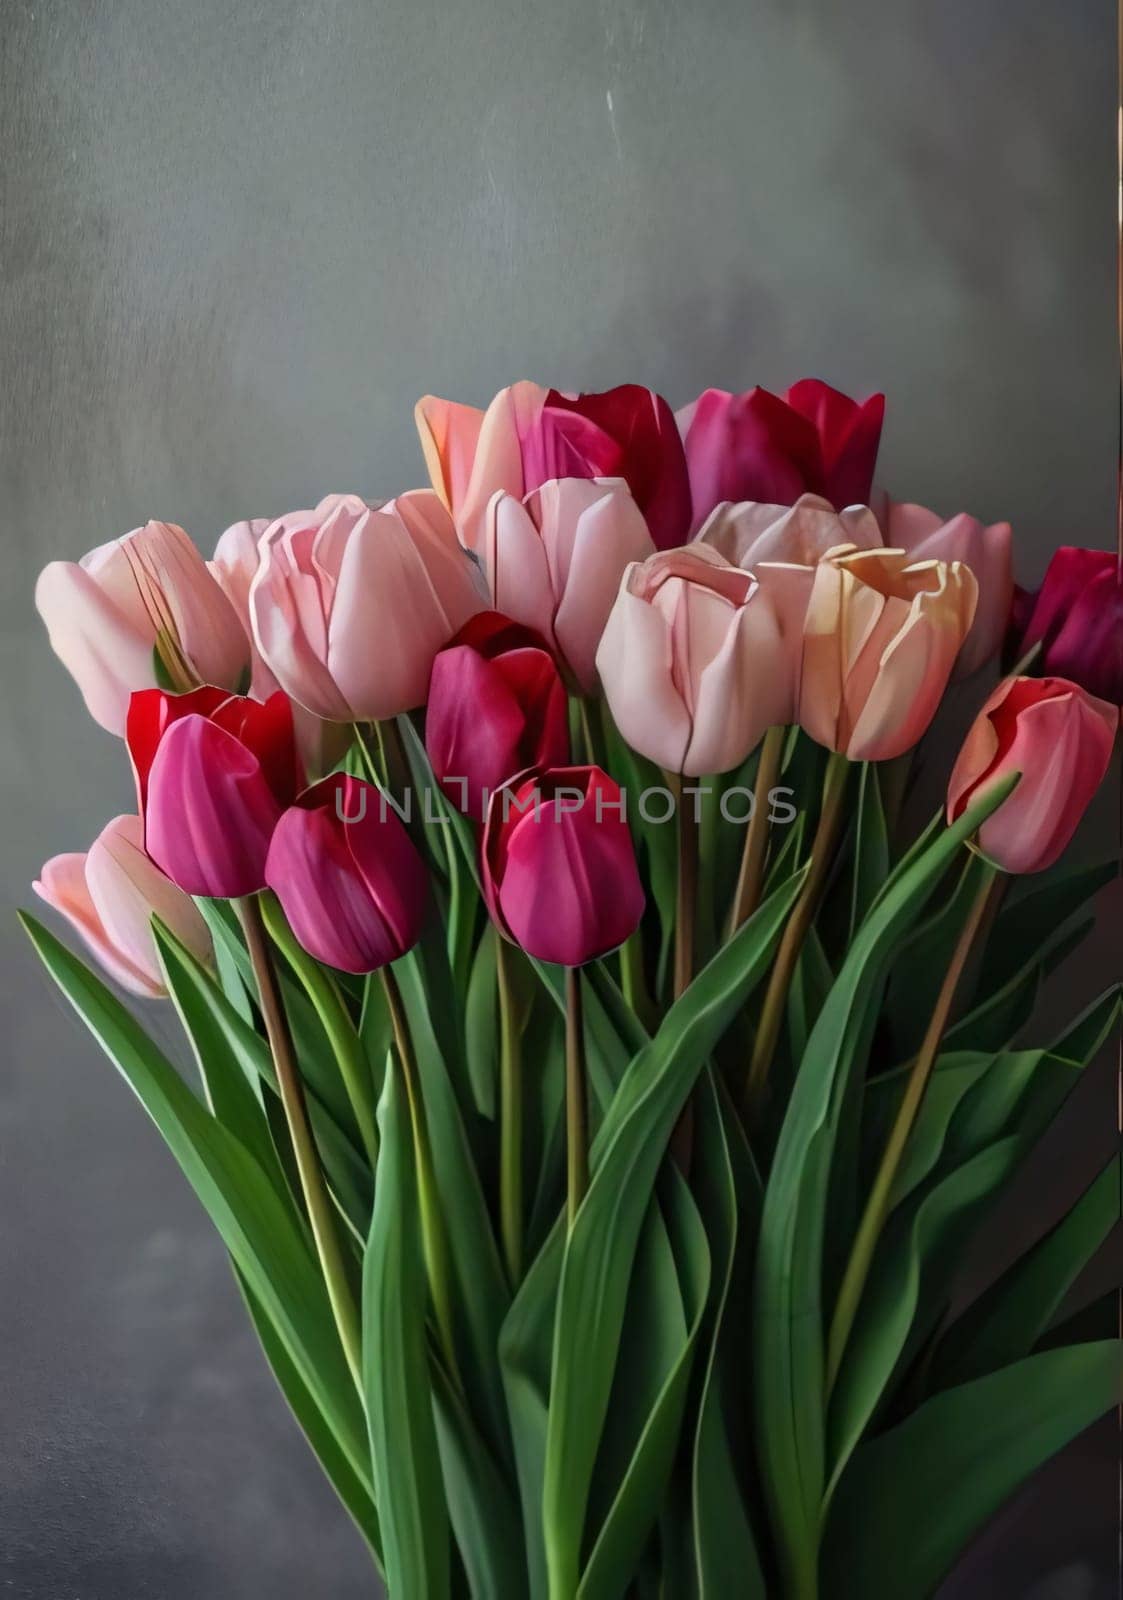 Bouquet of pink and red tulips, green leaves on a gray background. Flowering flowers, a symbol of spring, new life. by ThemesS